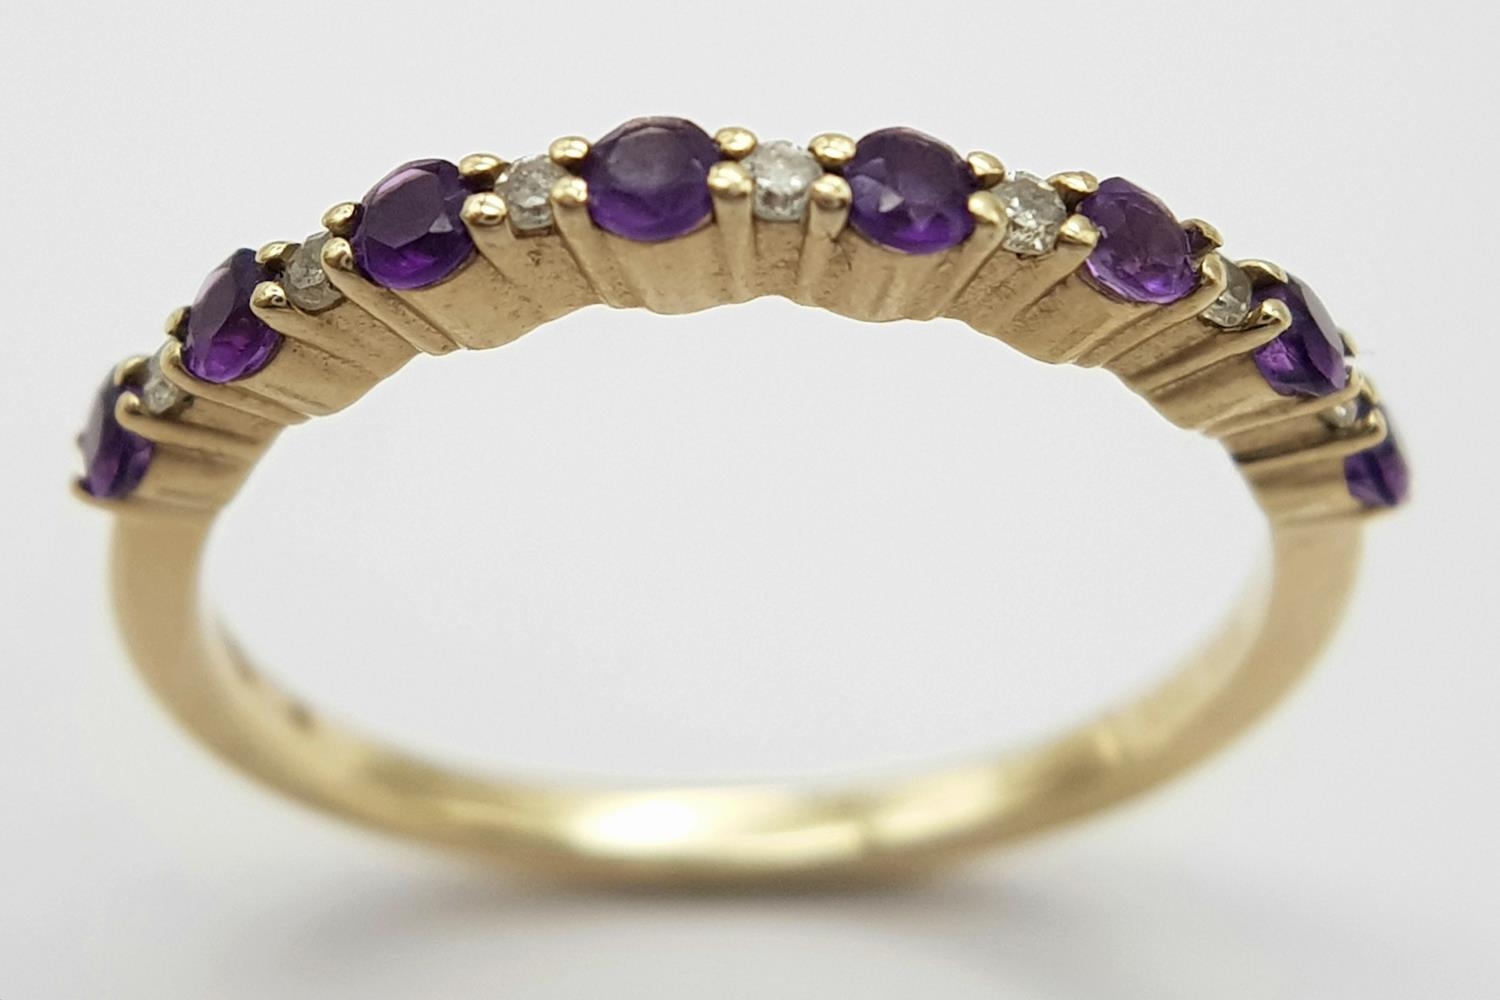 A 9K YELLOW GOLD DIAMOND & AMETHYST RING 1.3G SIZE N. SC 9077 - Image 4 of 5